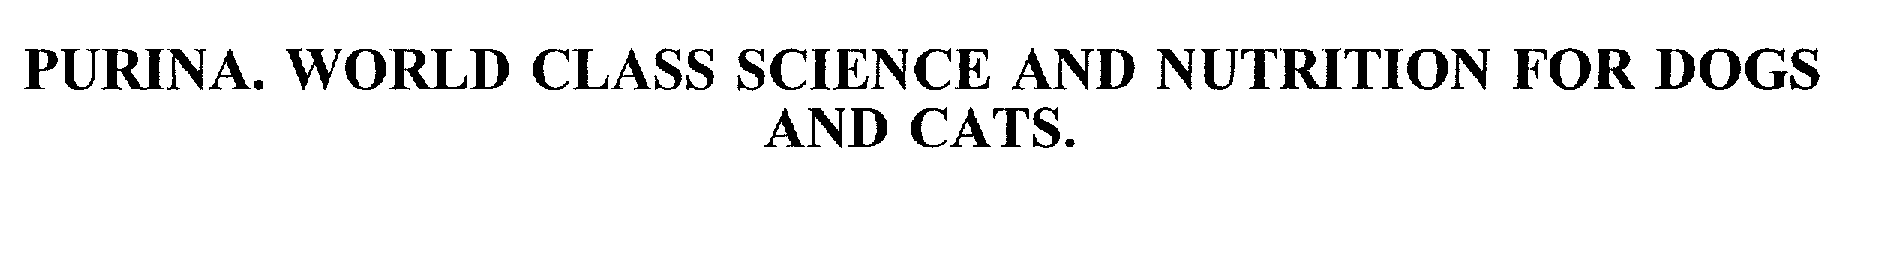  PURINA. WORLD CLASS SCIENCE AND NUTRITION FOR DOGS AND CATS.